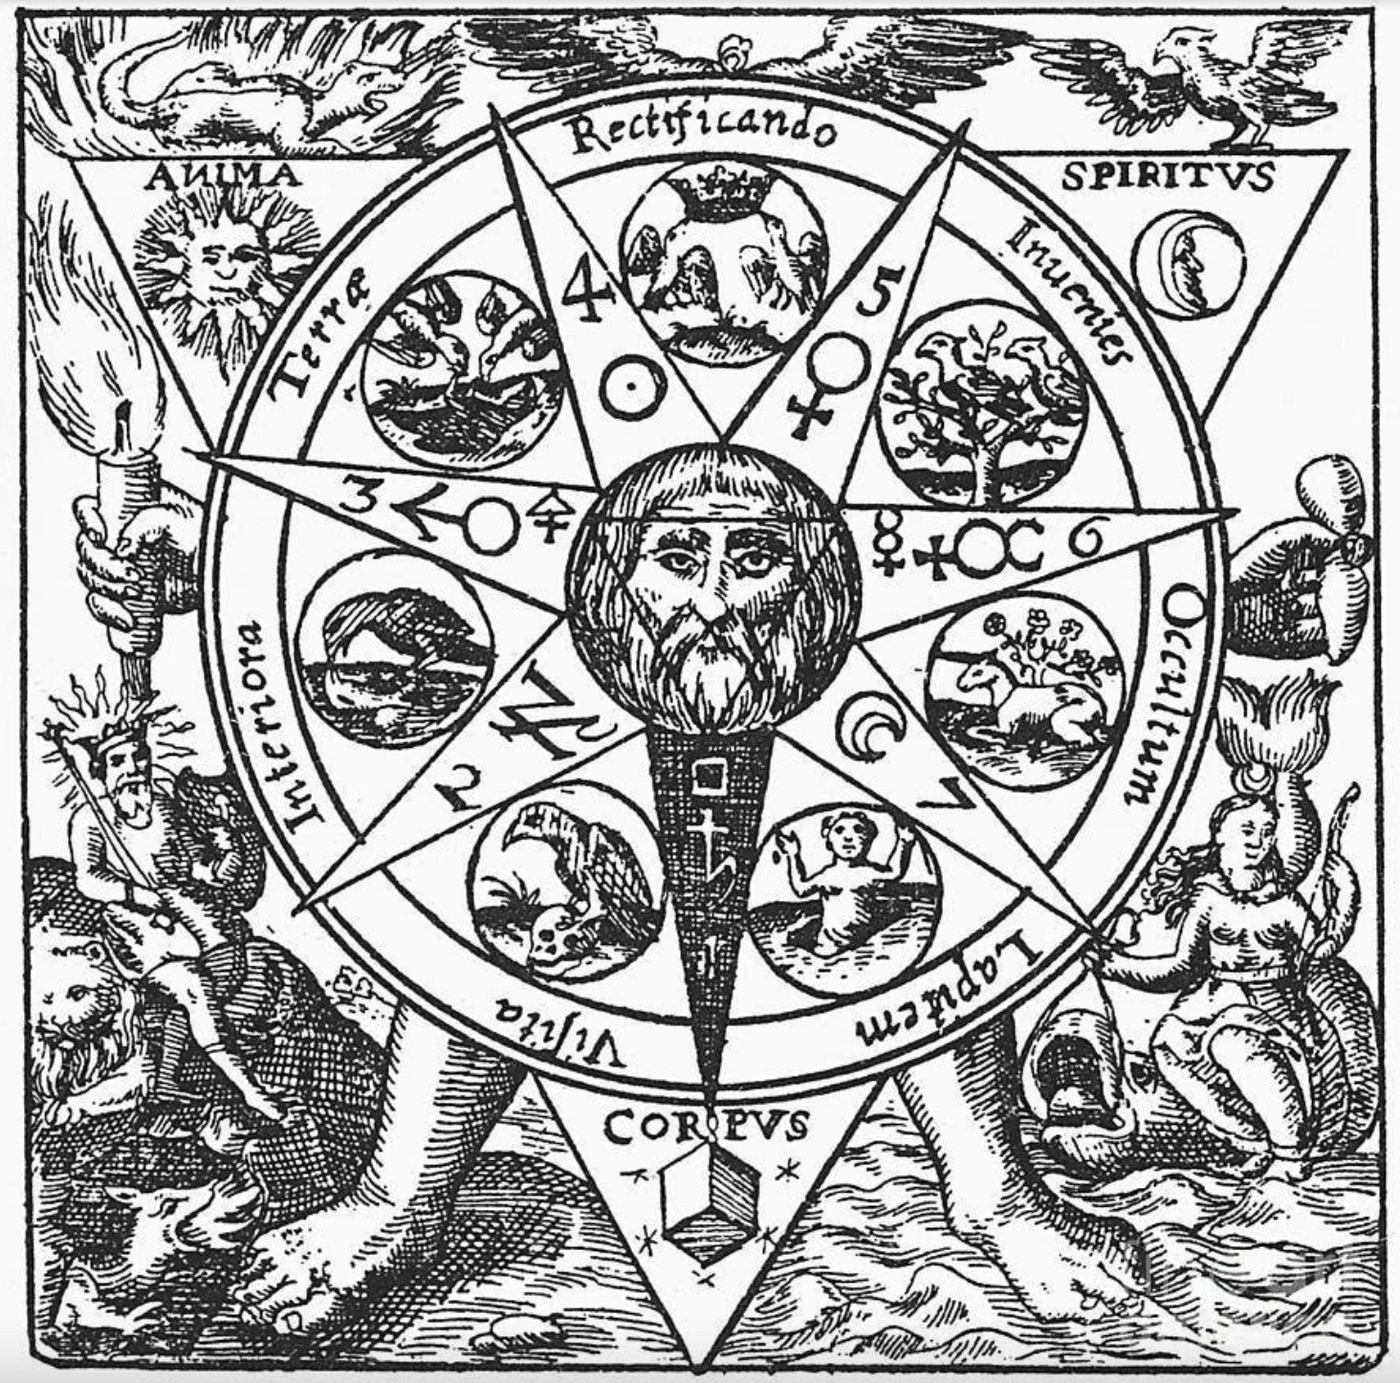 Hermetic & Alchemical Applications in the Lab